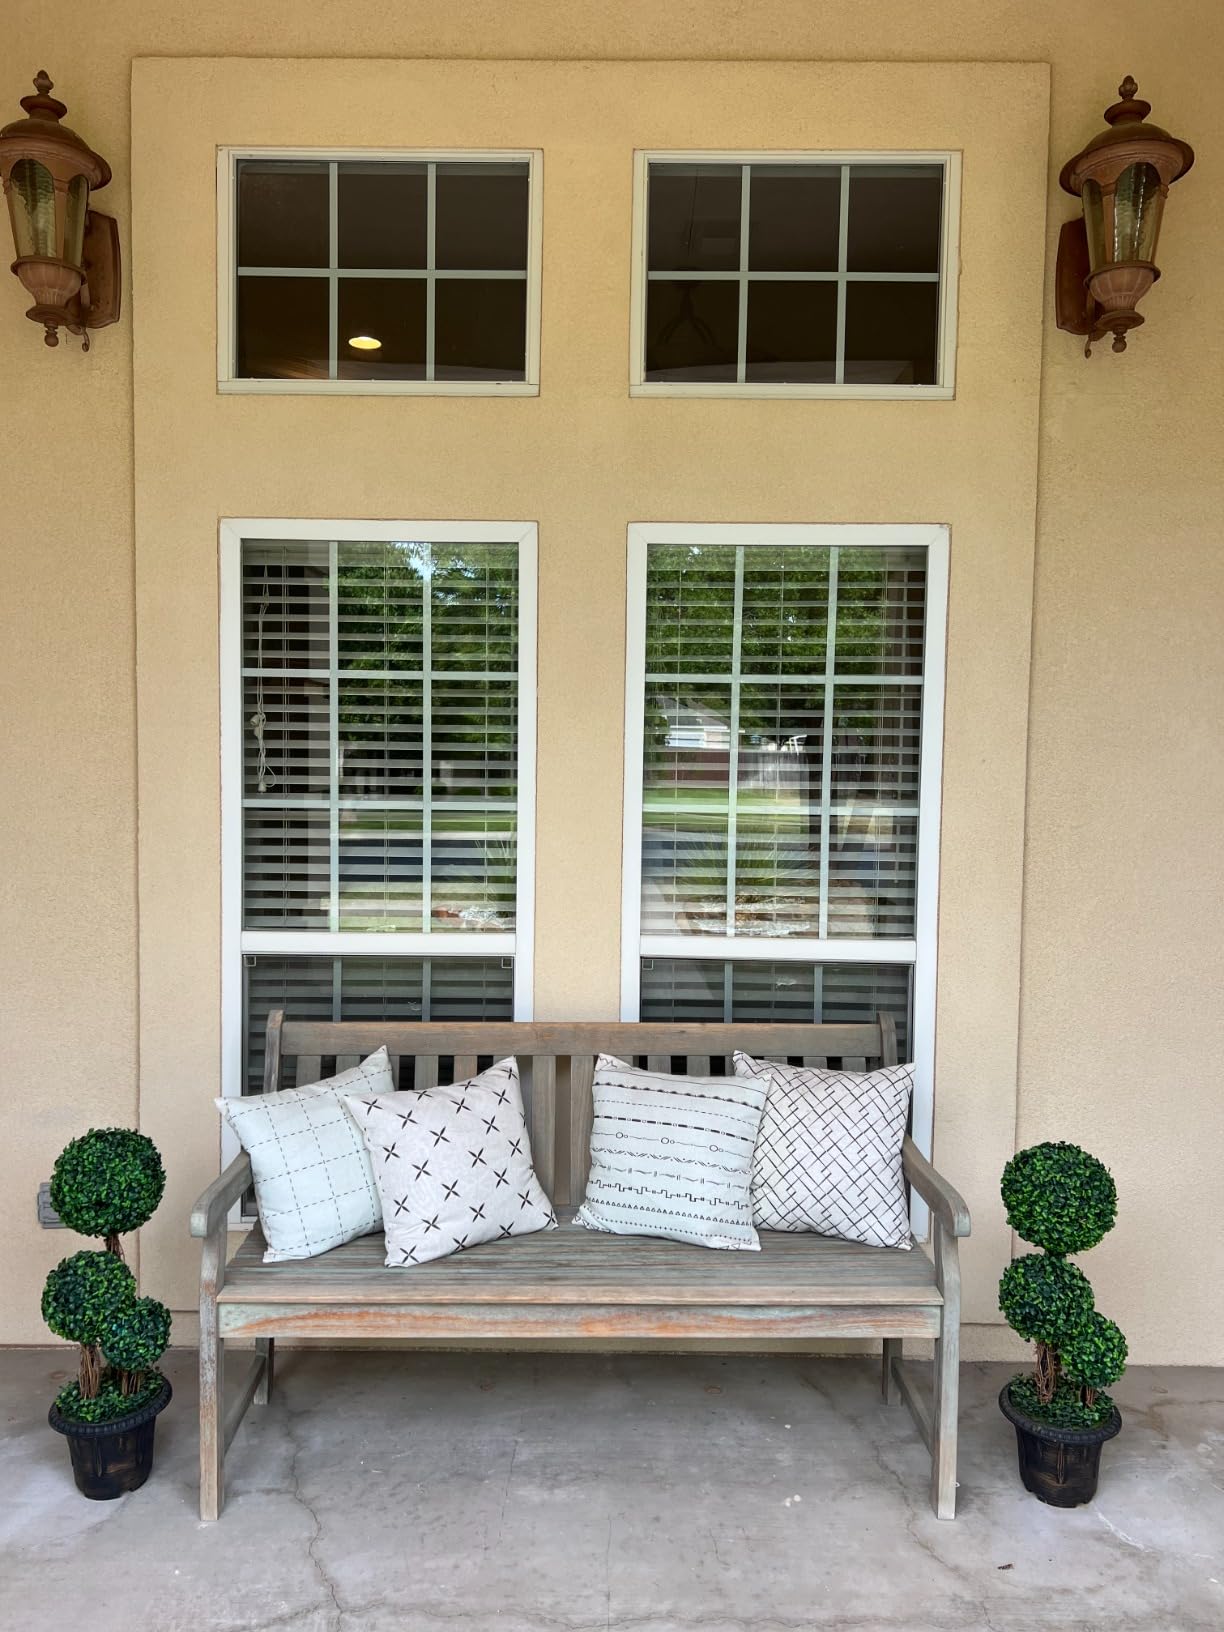 PERFECT DECOR FOR YOUR FRONT PORCH!!